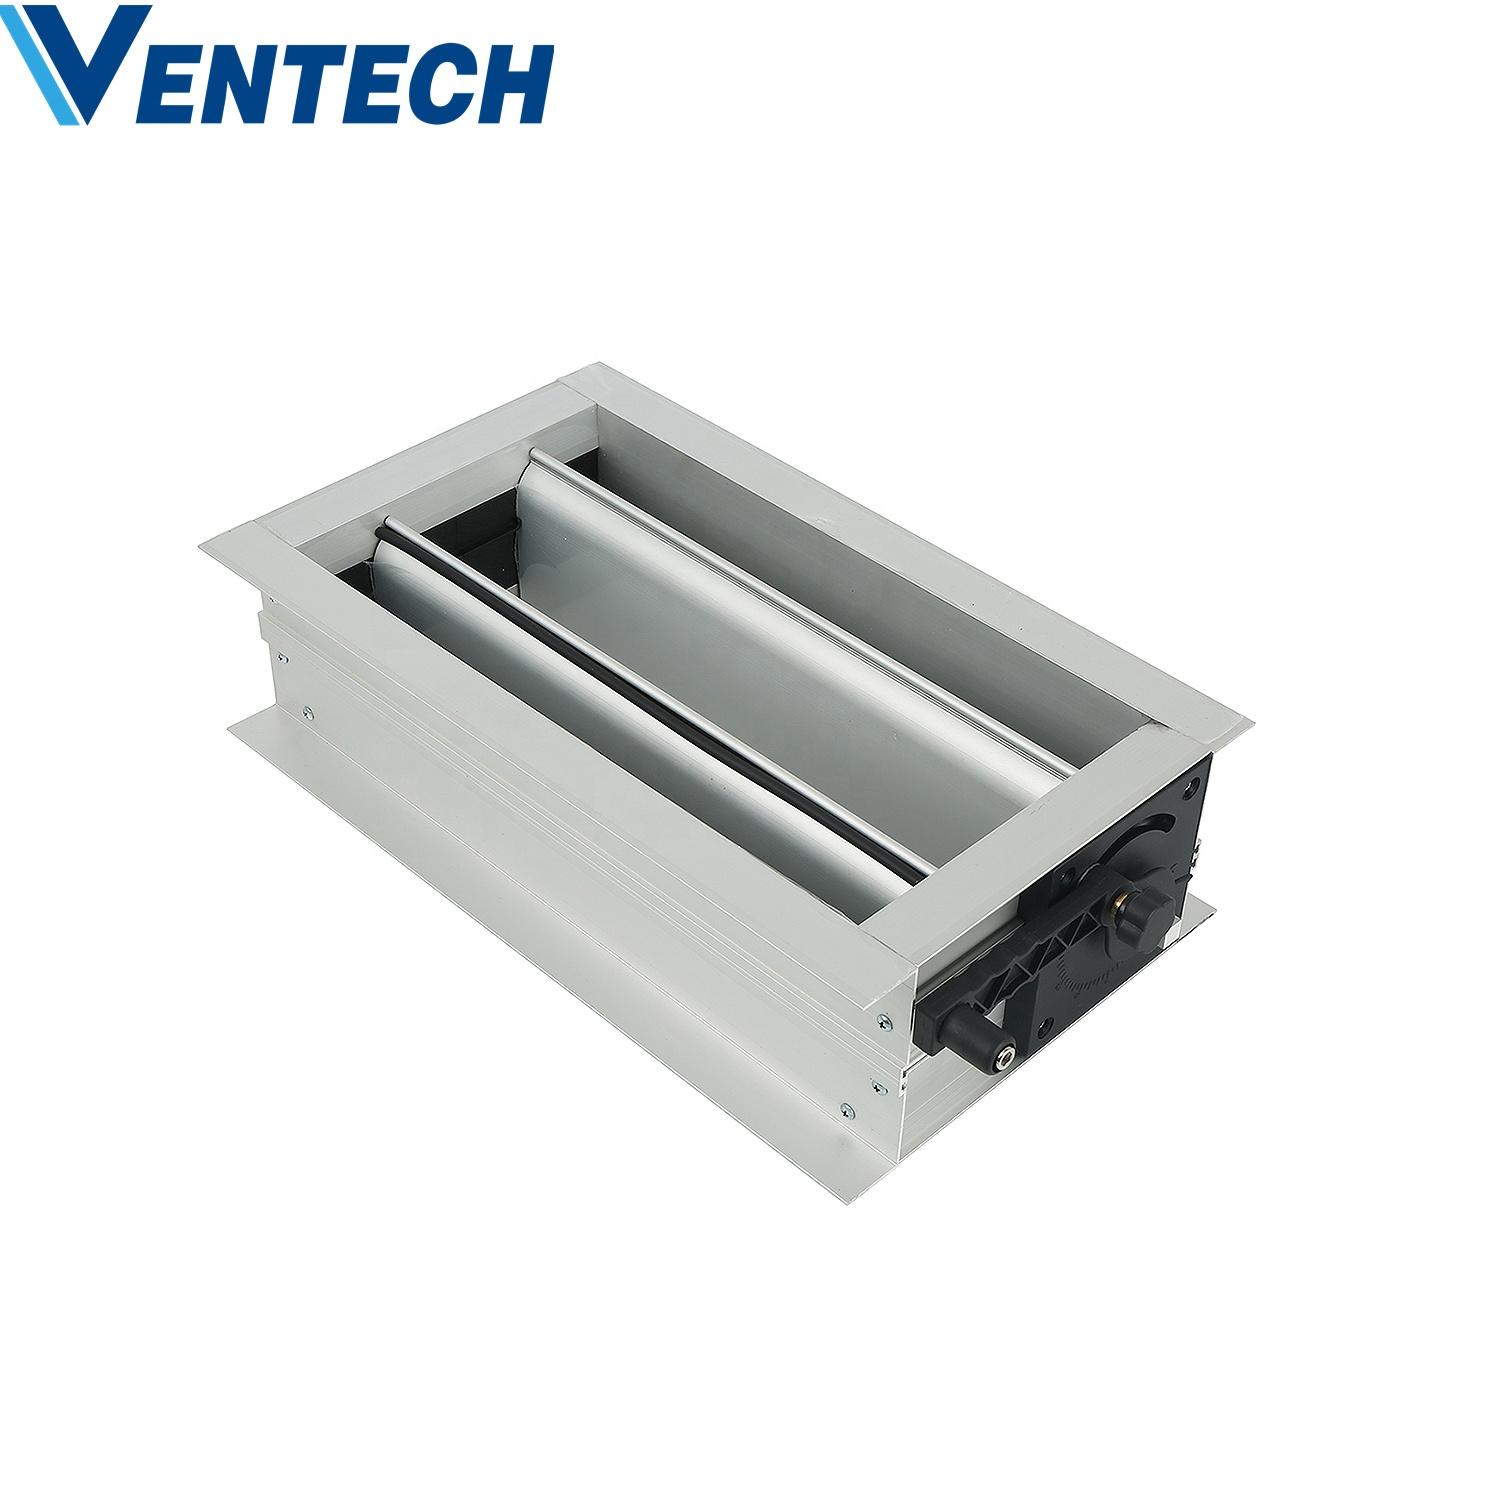 Air Conditioning System Air Ducting Opposed Blades Volume Control Dampers in Hvac Systems